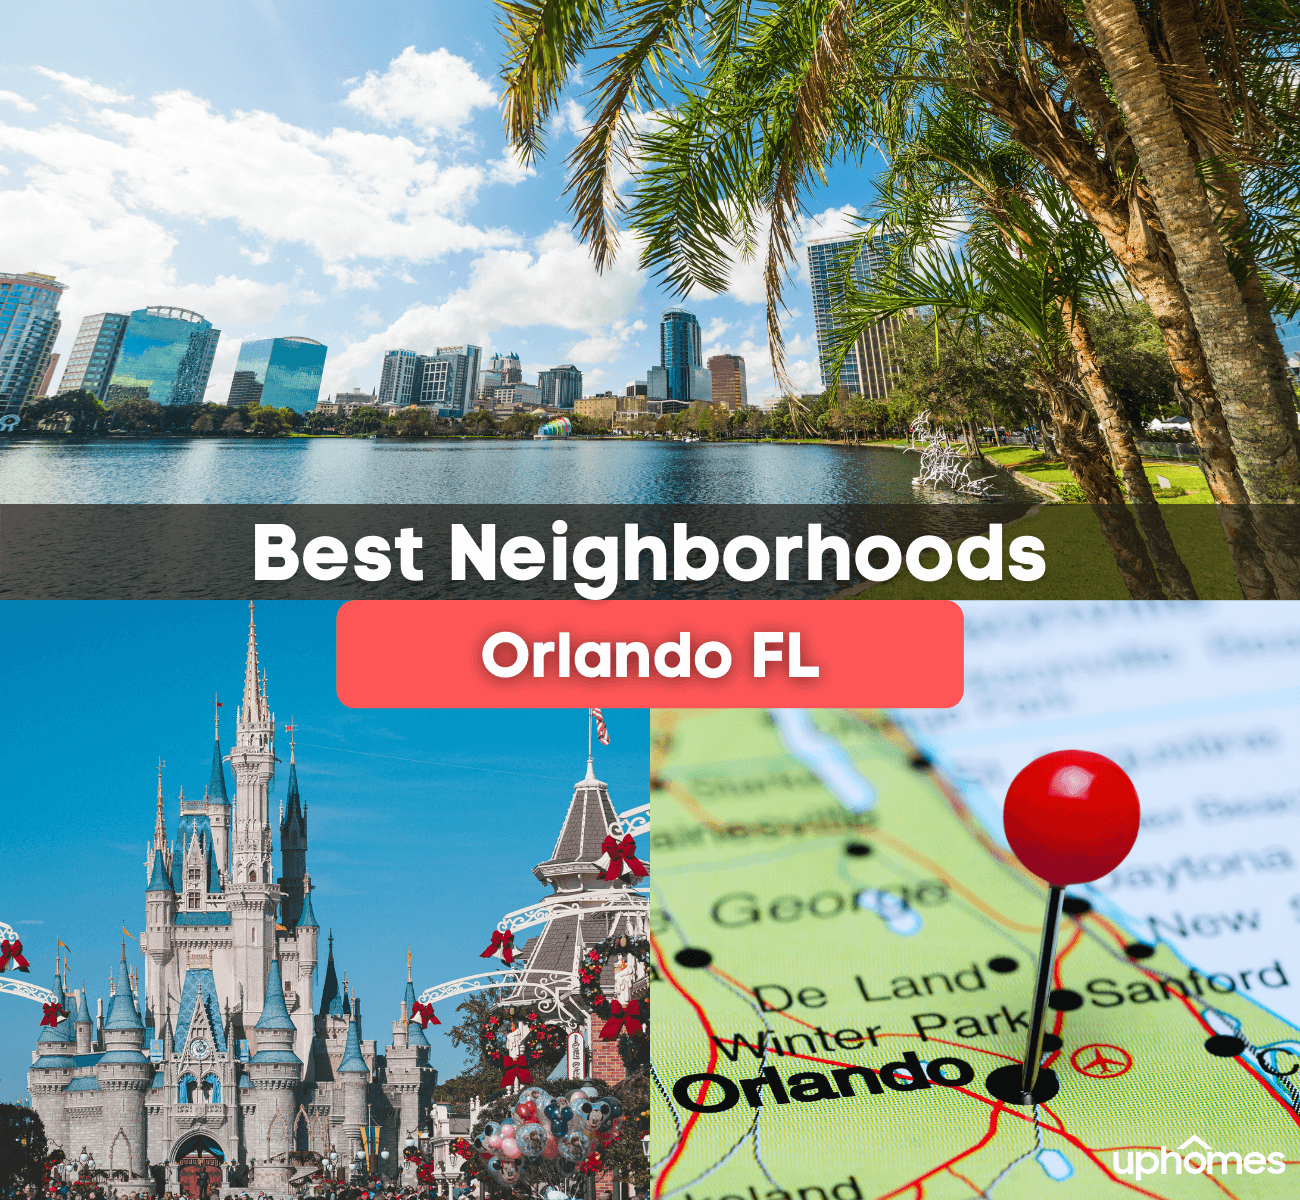 Best Neighborhoods in Orlando, FL - Here are the Best Places to Live in Orlando, Florida!